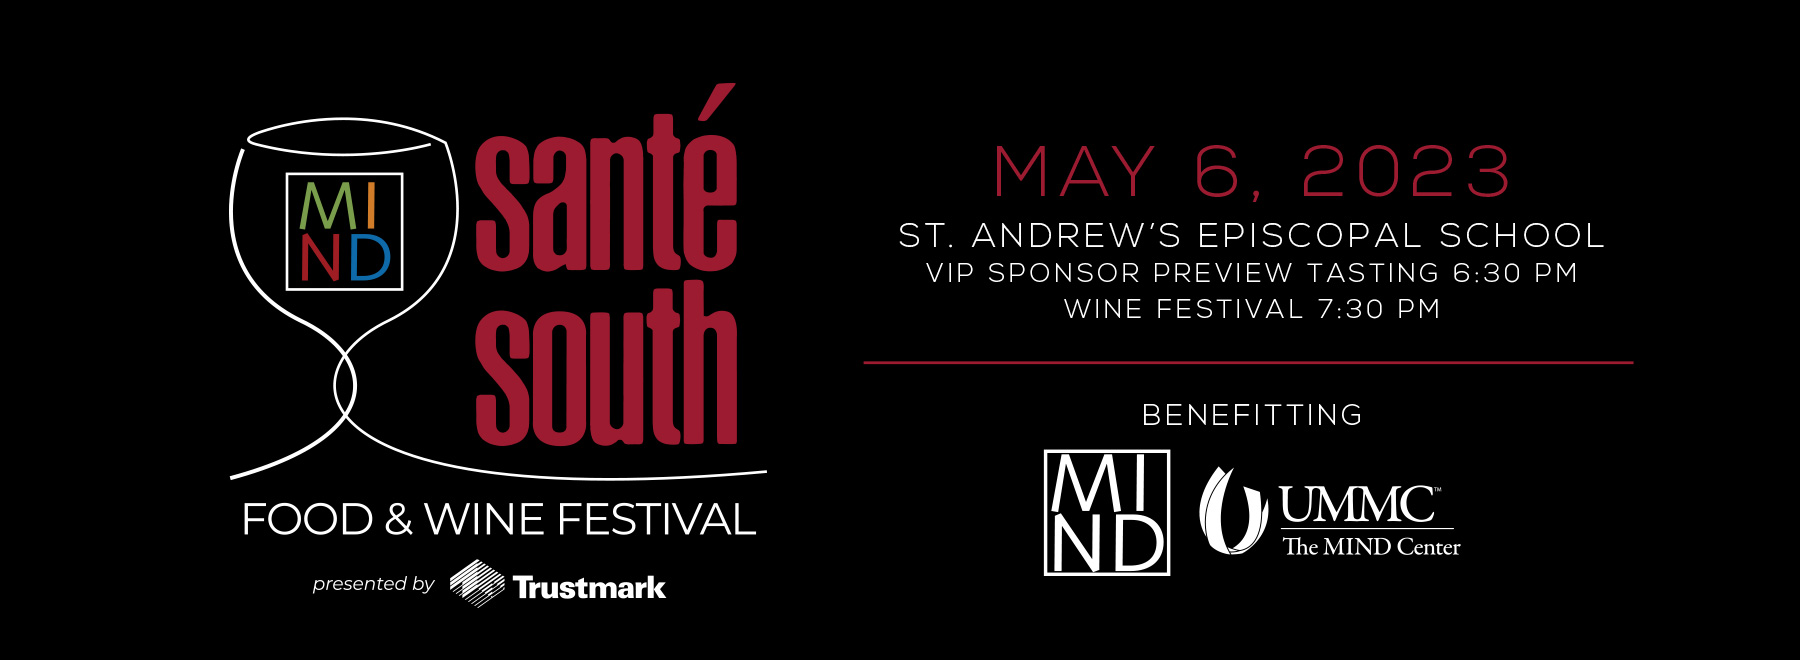 Abstract illustration of wine glass with MIND logo on black background. Text reads: Santé South Food and Wine Festival presented by Trustmark. May 6, 2023. St. Andrew’s Episcopal School. VIP Sponsor Preview Tasting - 6:30 p.m. Wine Festival - 7:30 p.m. Benefitting UMMC - The MIND Center.